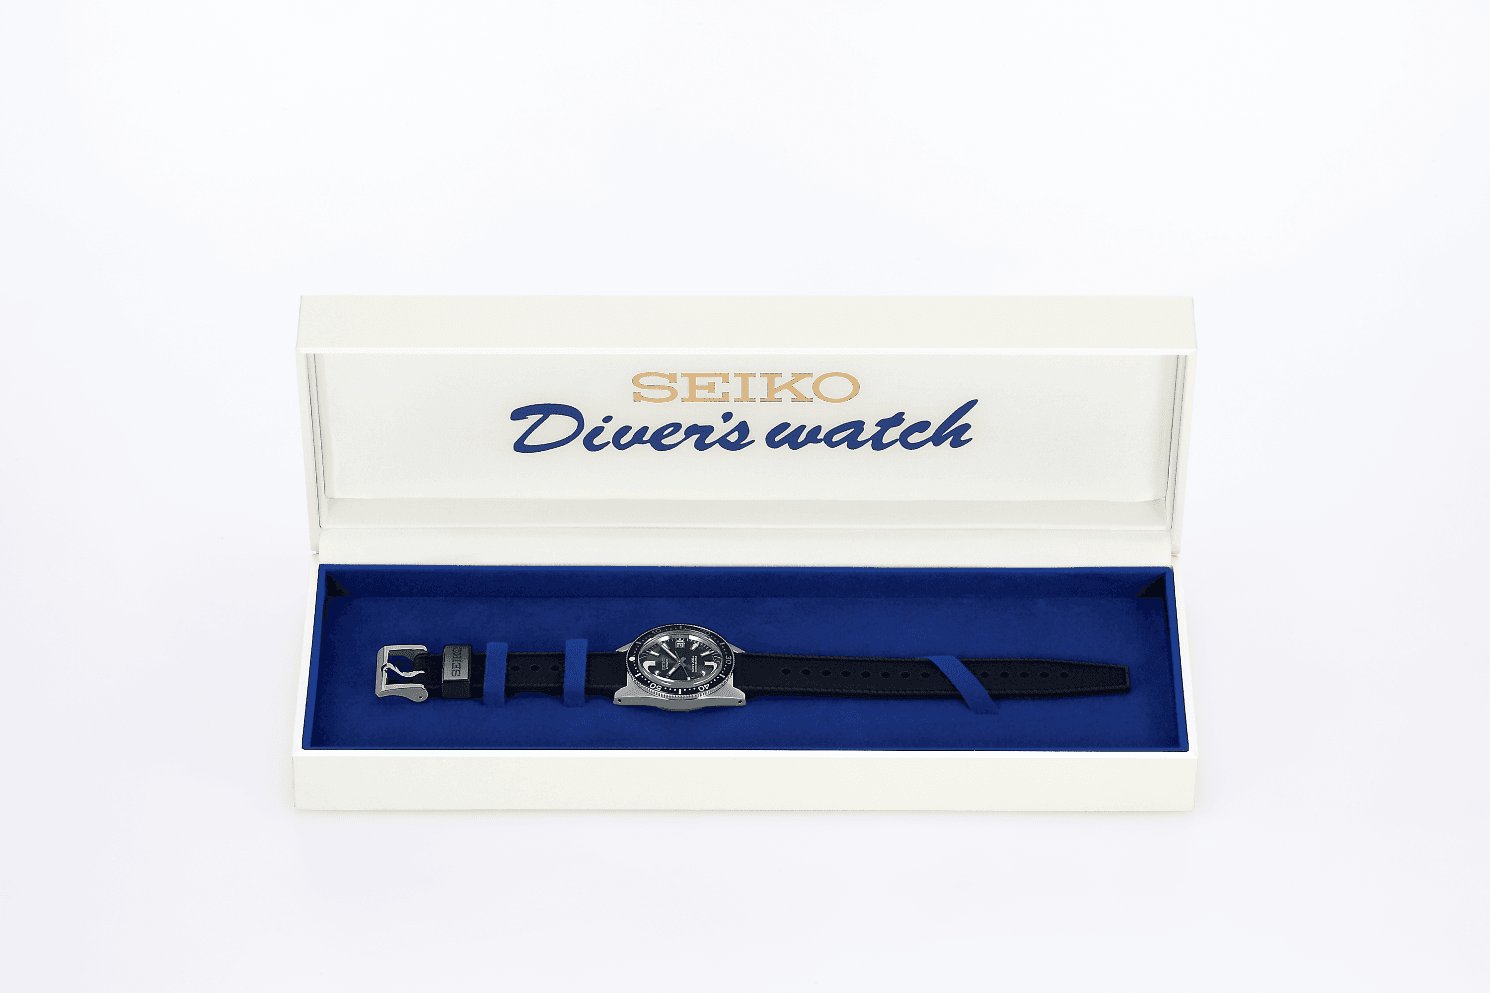 The watch is presented in a 1960s-styled special box.